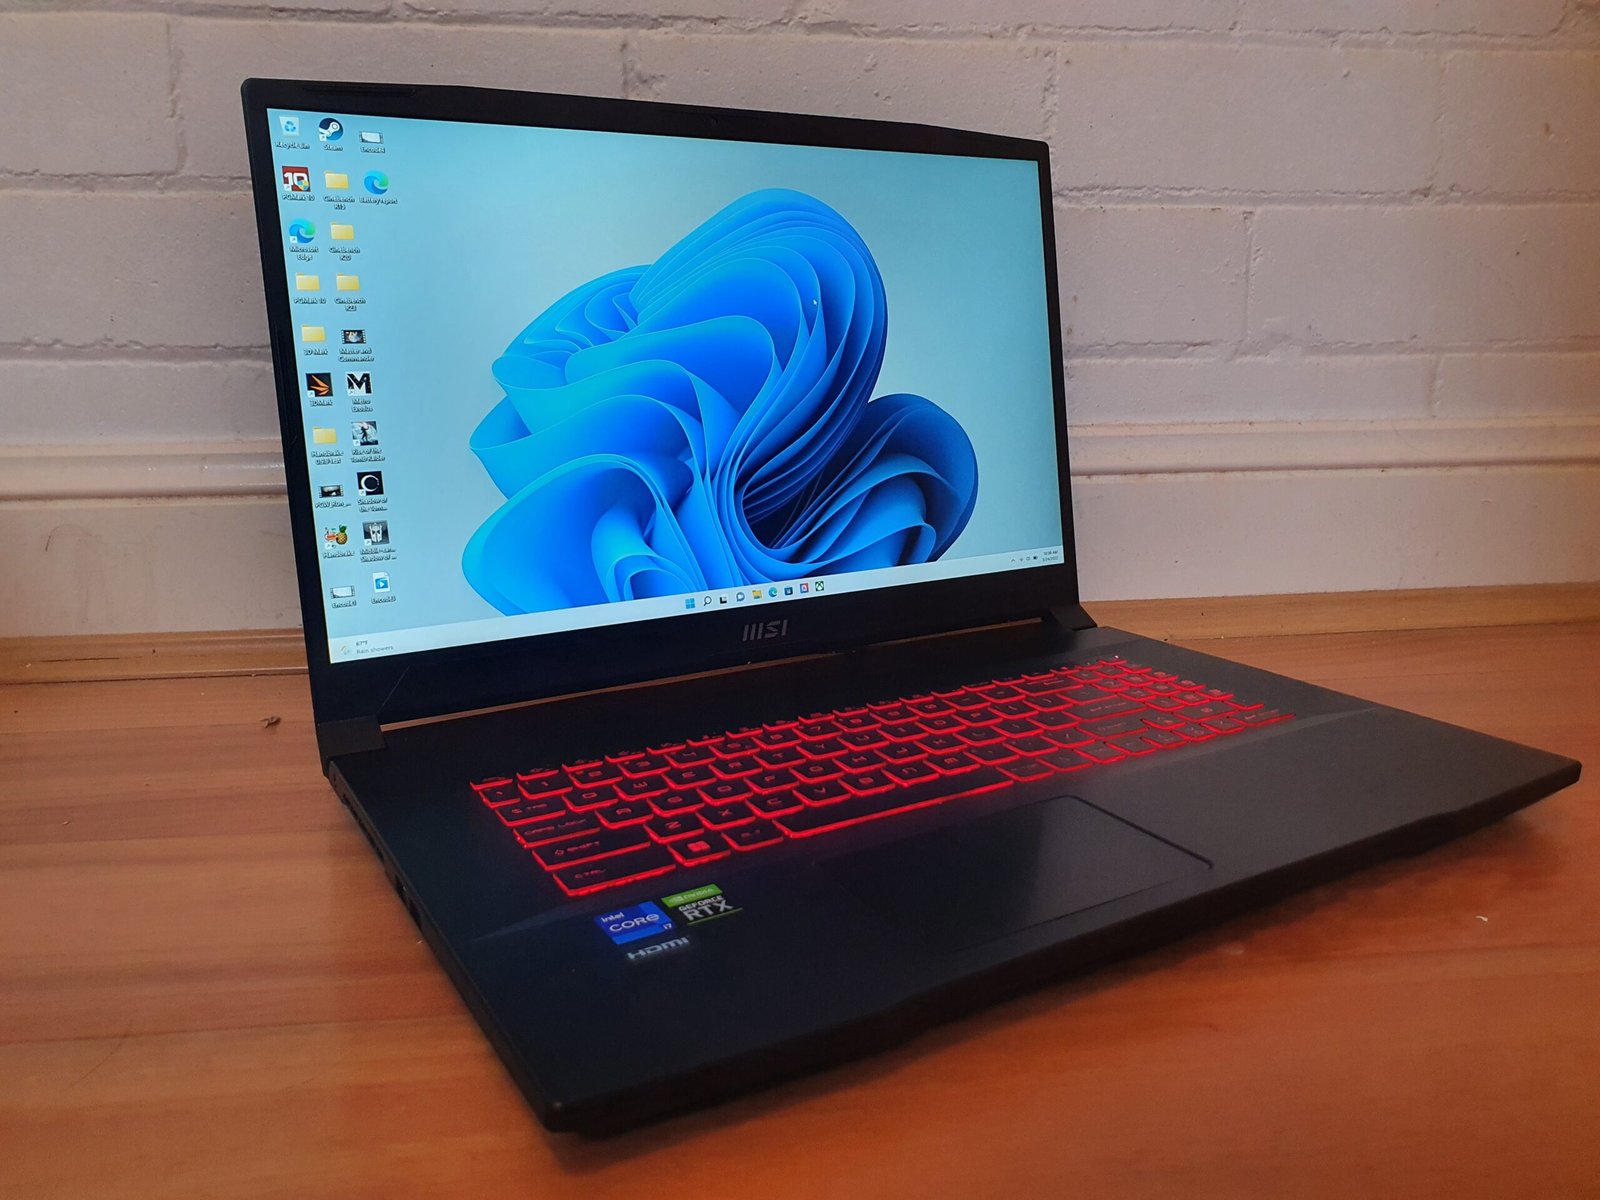 The last observe gaming laptops below $1,000: Simplest overall, most efficient battery life, and more